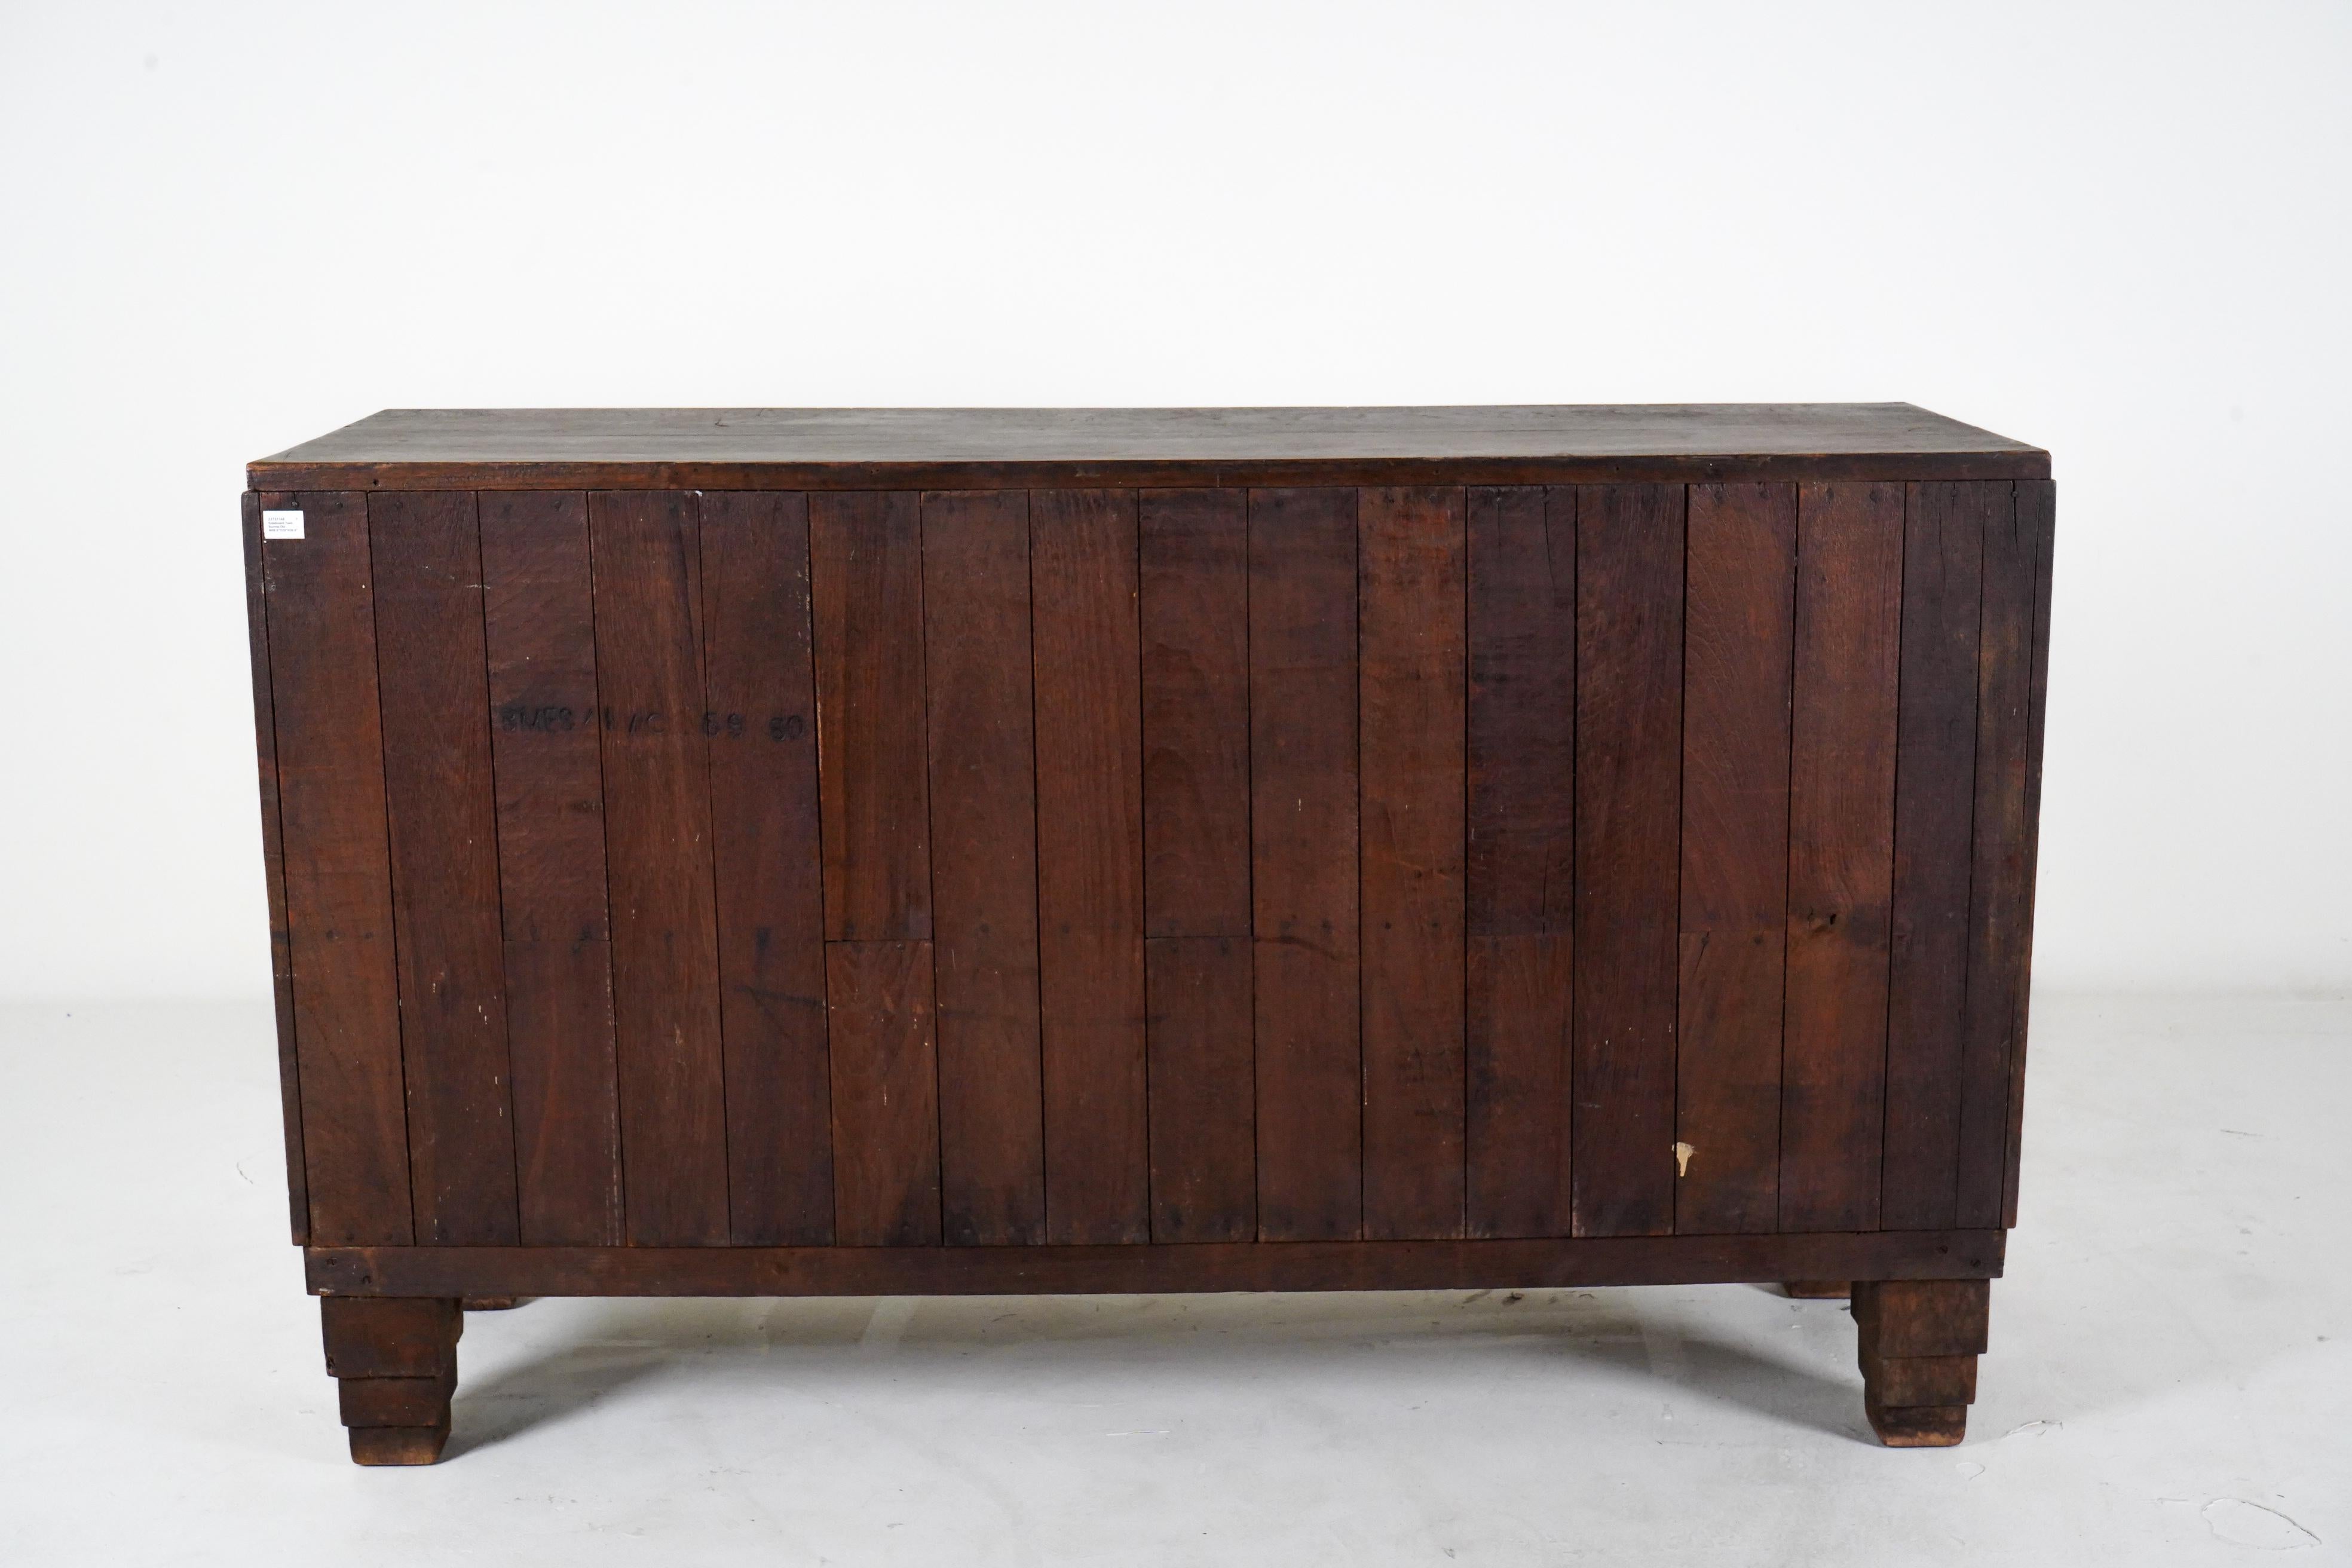 A British Colonial Teak Wood Shop Counter For Sale 1